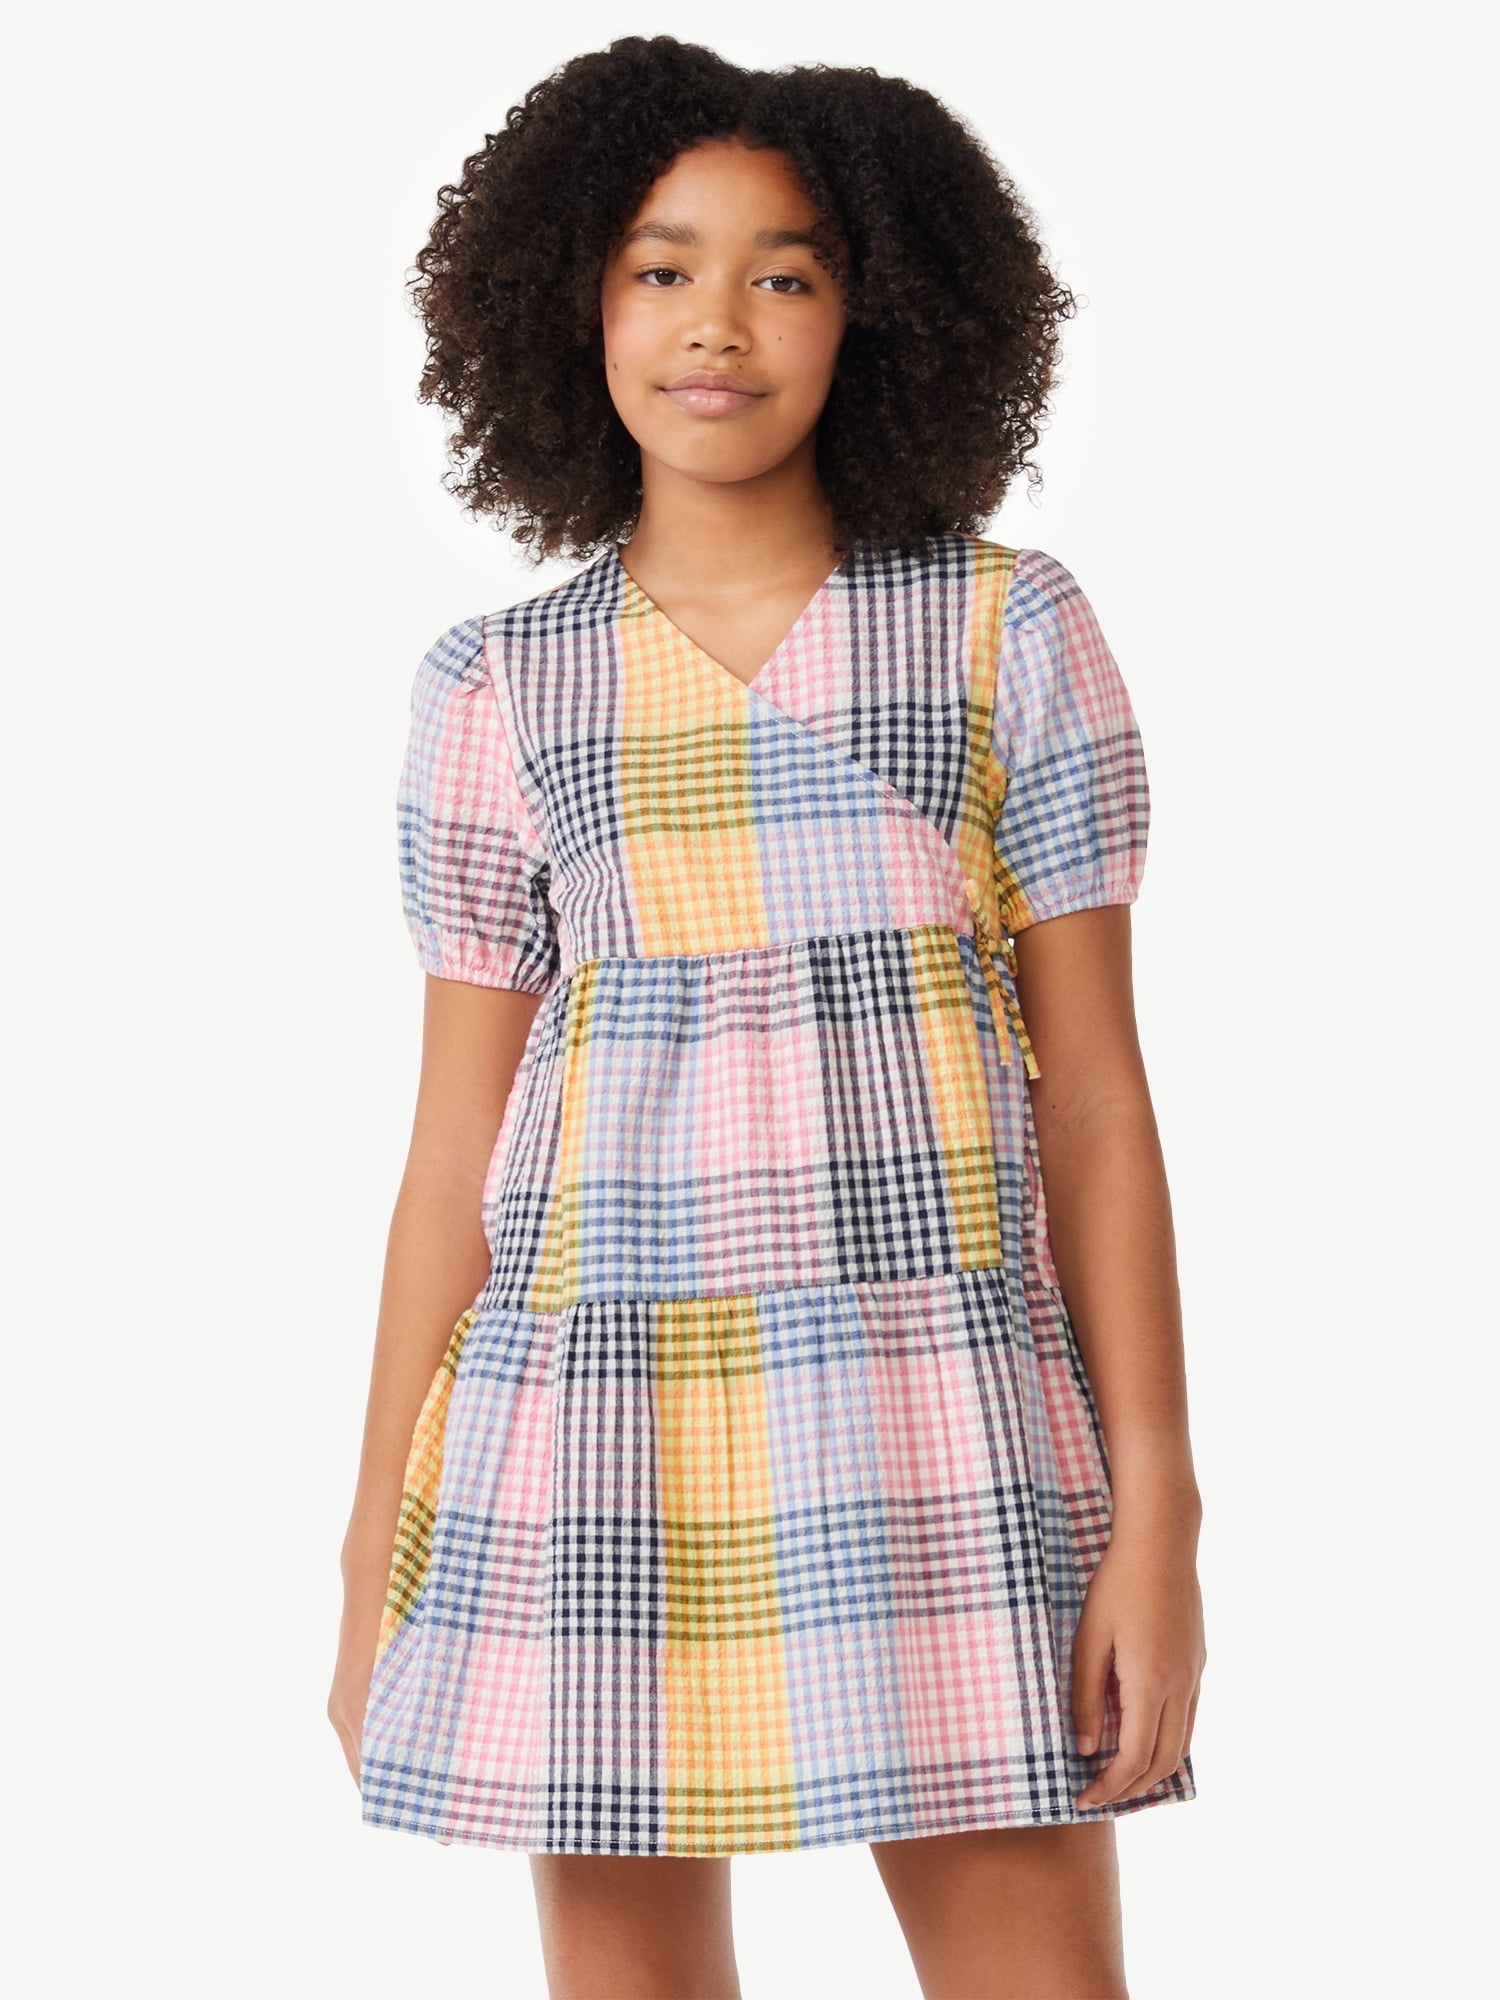 Free Assembly Girls Faux Tie Dress, Sizes 4-18